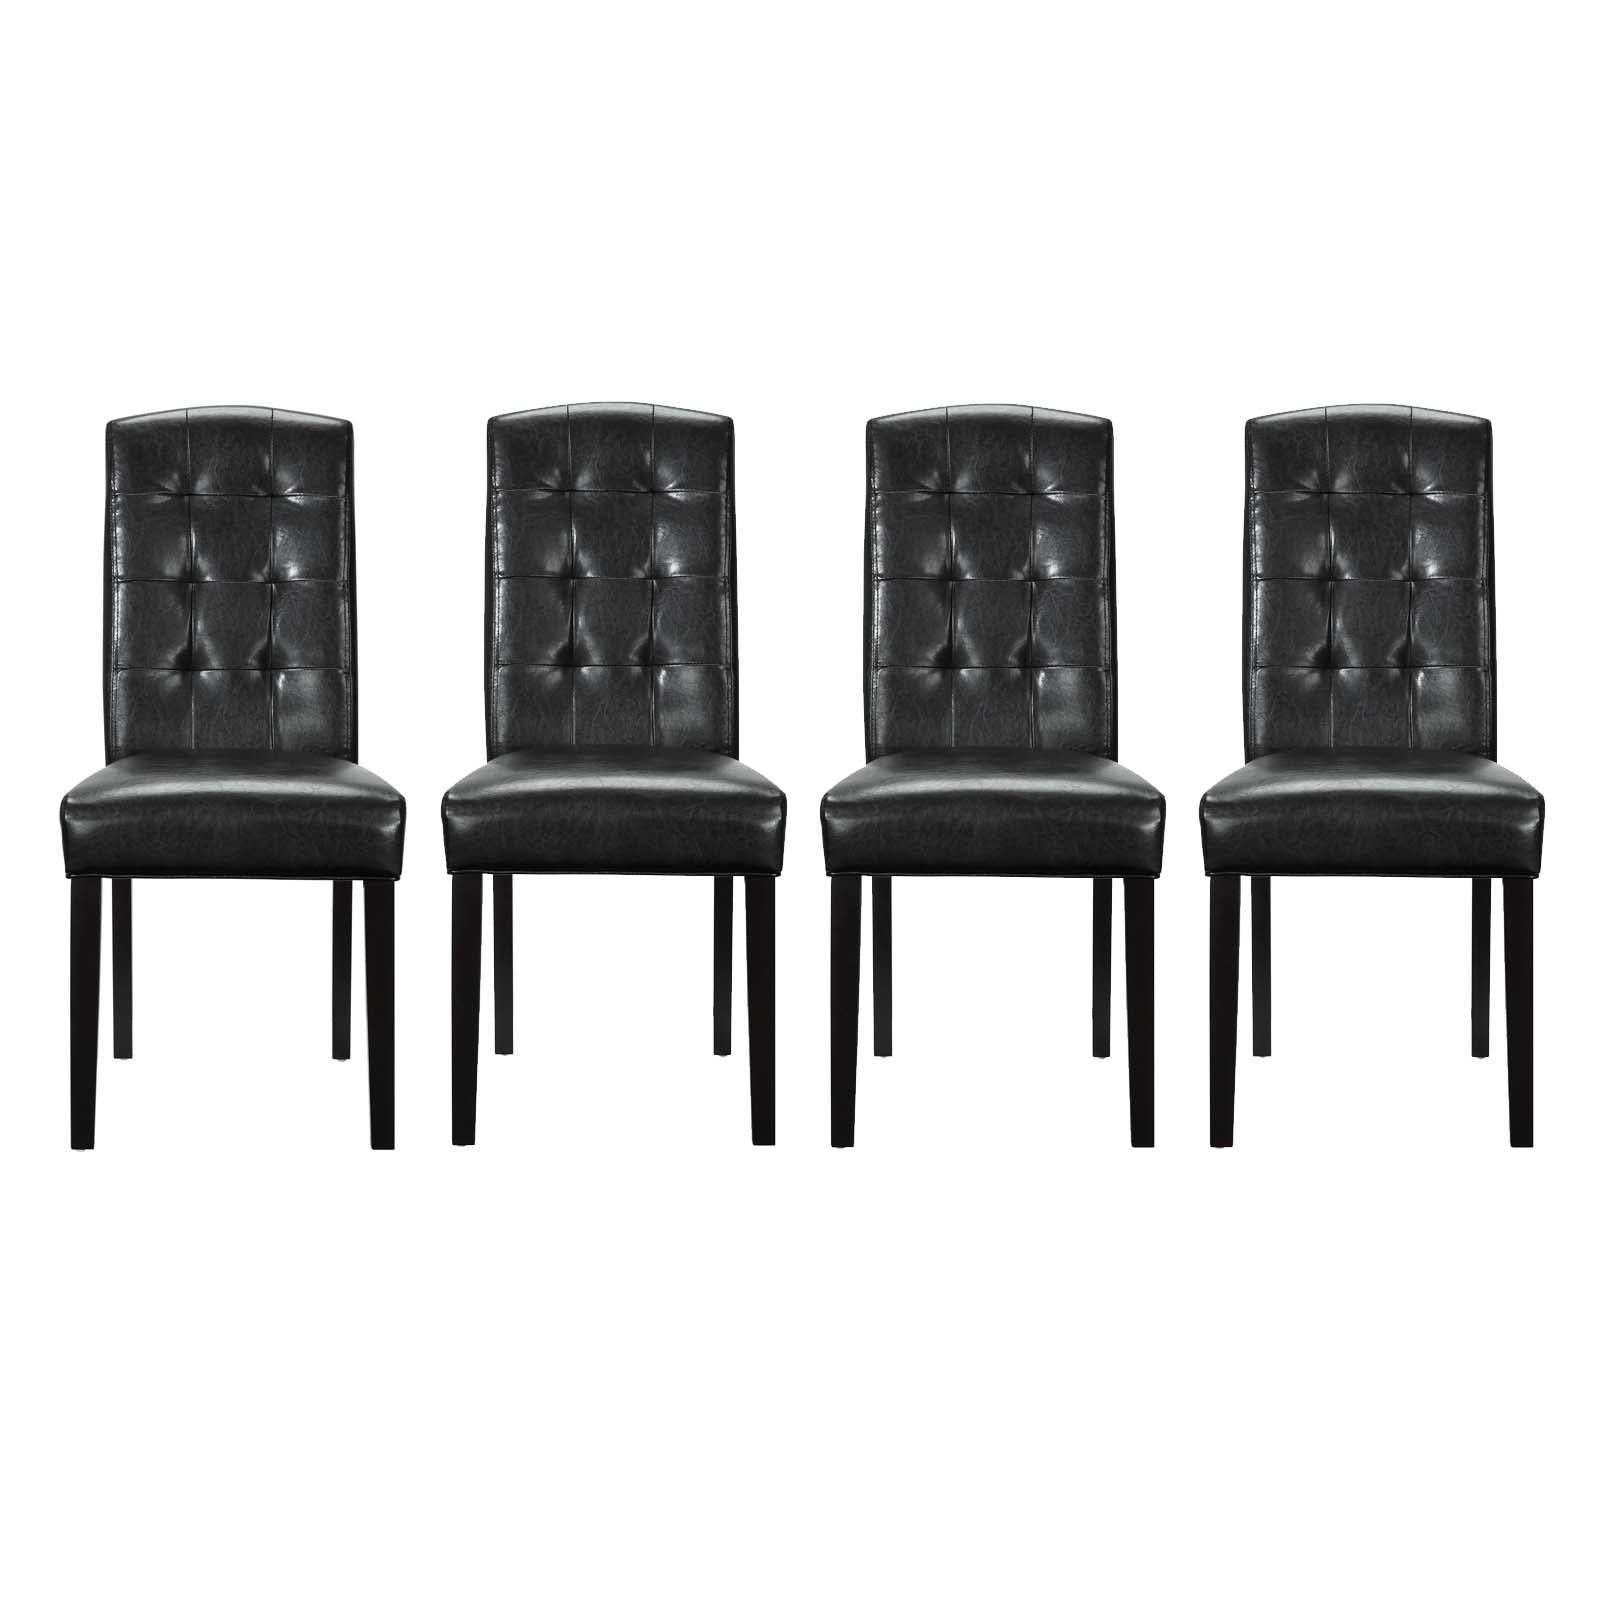 Button Tufted Predure Dining Room Chair - Kitchen Dining Chair  - Vinyl Dining Chair Set Of 4